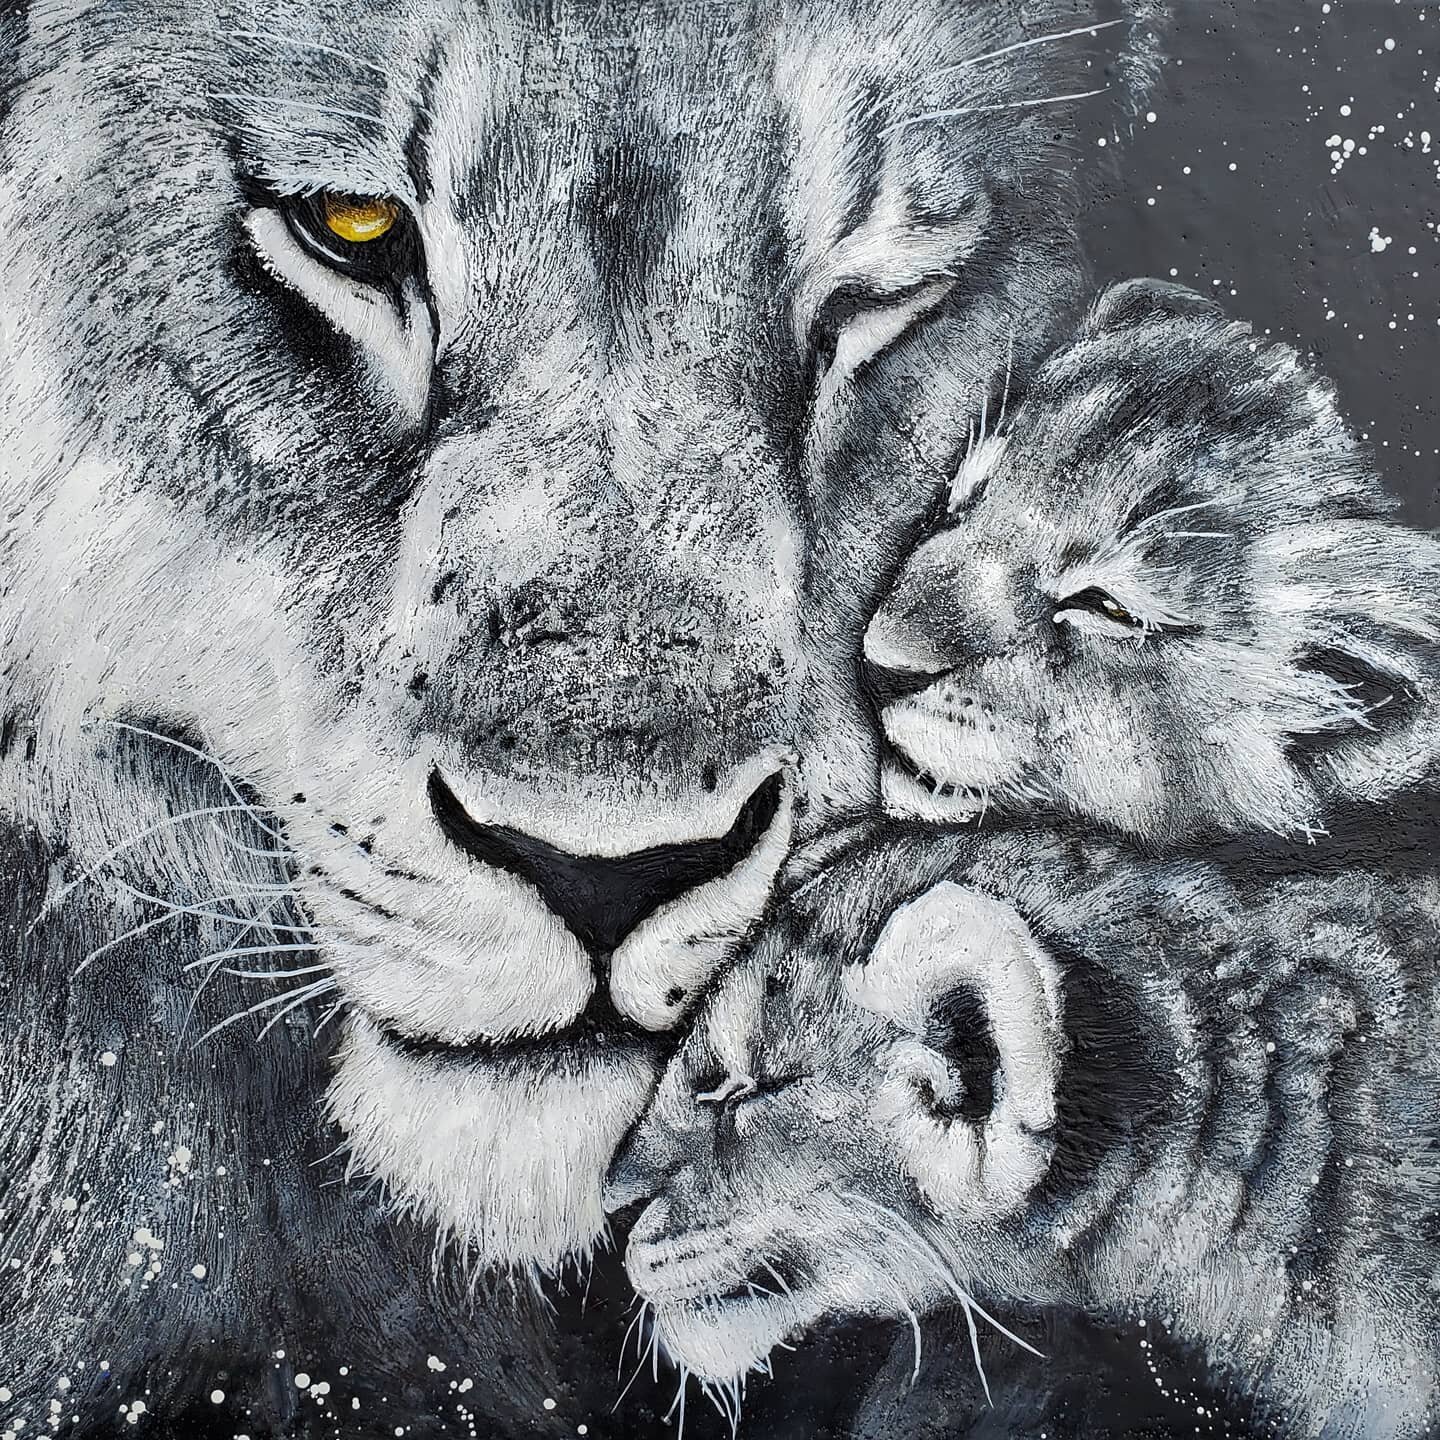 Here she is!  The lioness painting is finished.  I think its one of the paintings I'm most proud of! 

I just adore how snuggled in the babies are, fully loving their big strong mama!  Knowing she will keep them safe and take care of them.

Check out